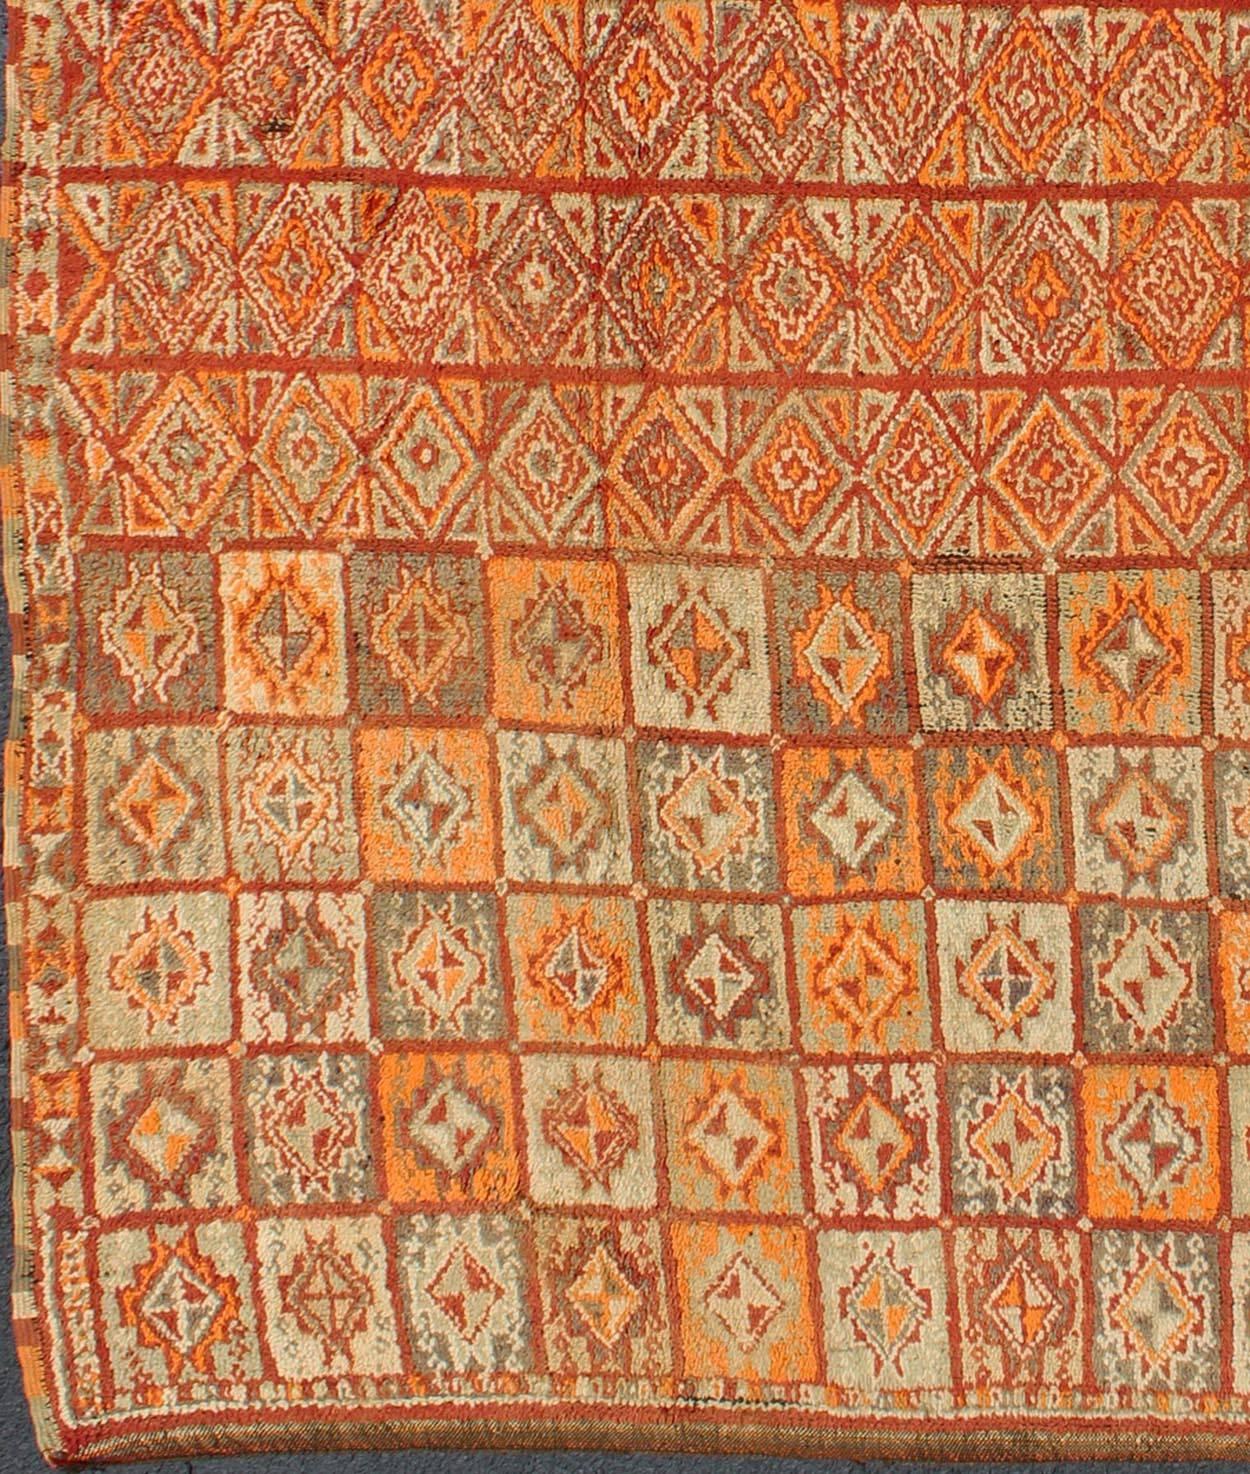 Vintage Moroccan Rug in Autumn Colors, Red, Pumpkin, Orange and Light Green
This colorful Moroccan rug boasts a grid of geometric designs and a multitude of Fall like colors Red, Pumpkin, Orange and accent colors such as beige, camel, brown, and